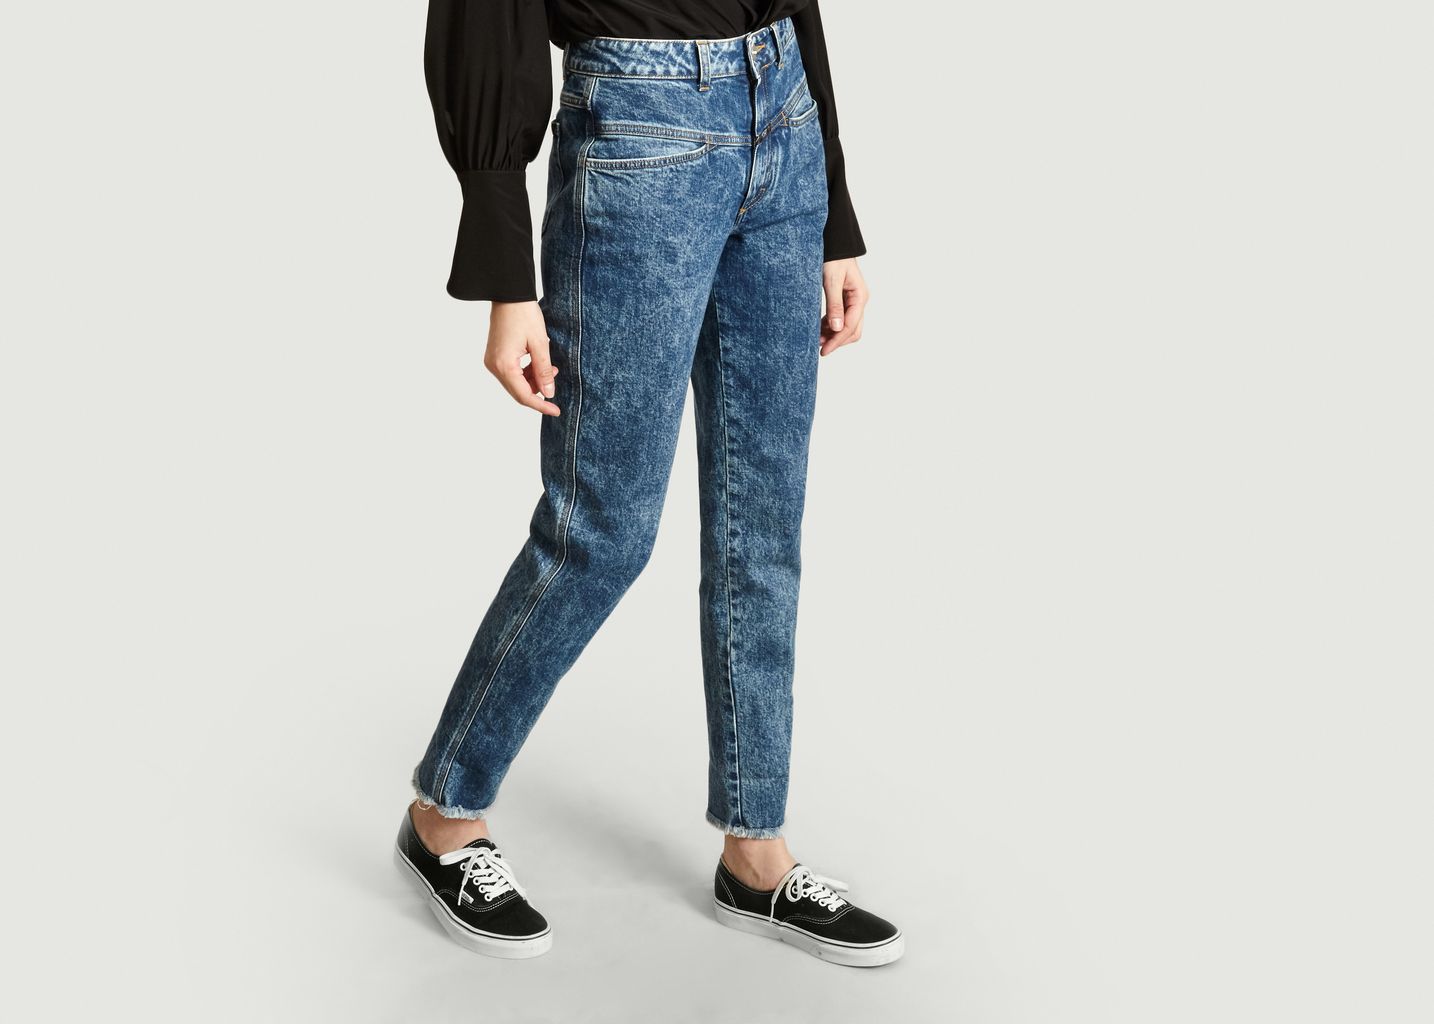 Pedal Pusher Jeans - Closed